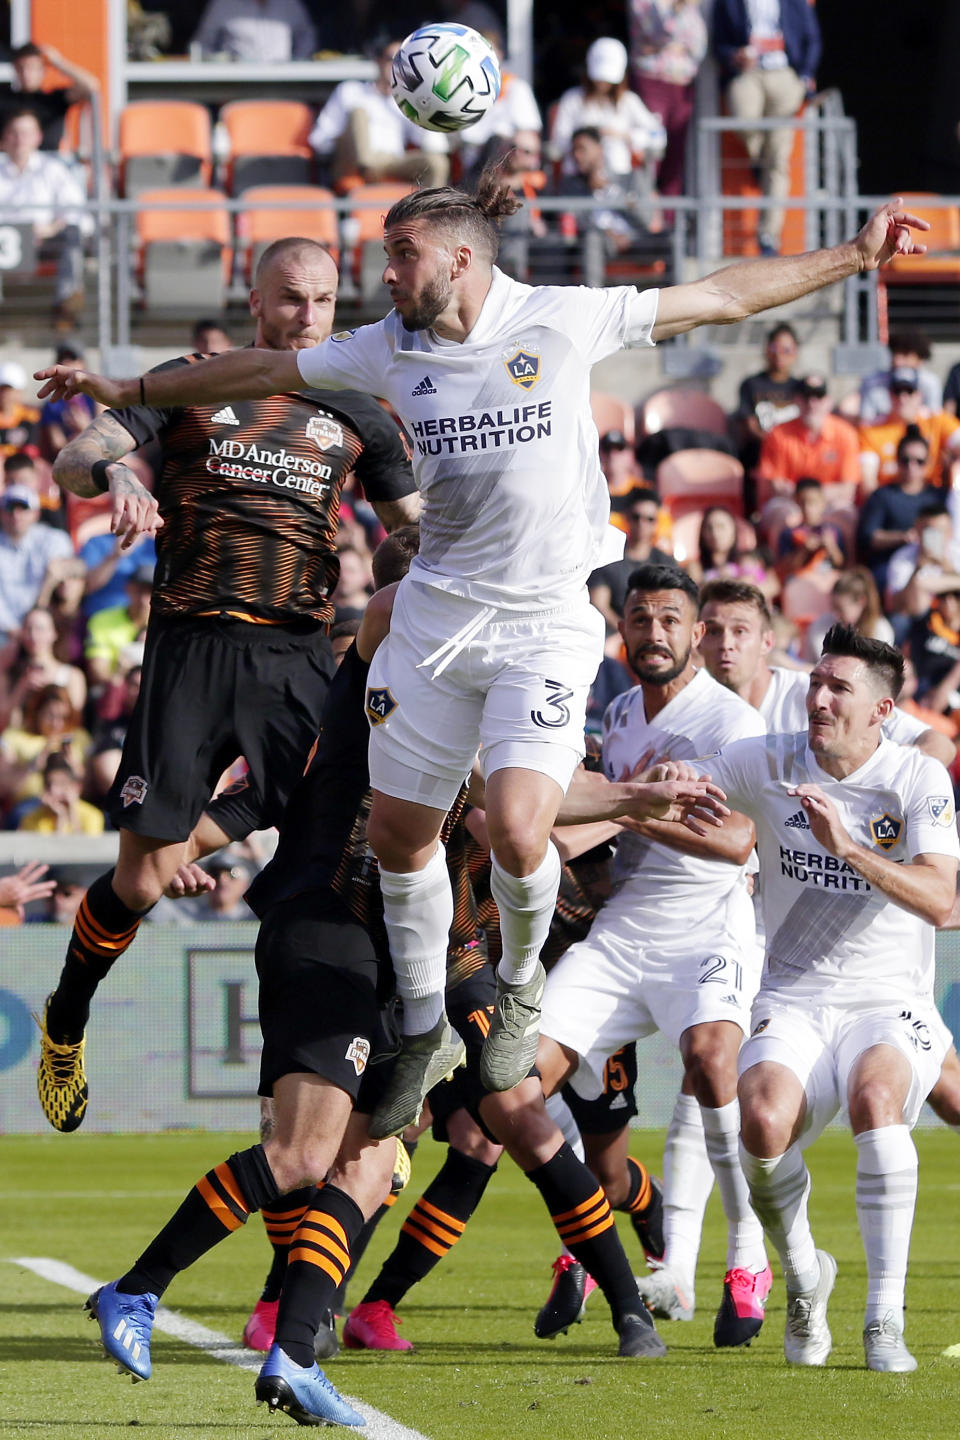 Los Angeles Galaxy defender Emiliano Insúa (3) attempts to head the ball on goal in front of Houston Dynamo defender Kiki Struna, left, during the second half of an MLS soccer match Saturday, Feb. 29, 2020, in Houston. (AP Photo/Michael Wyke)